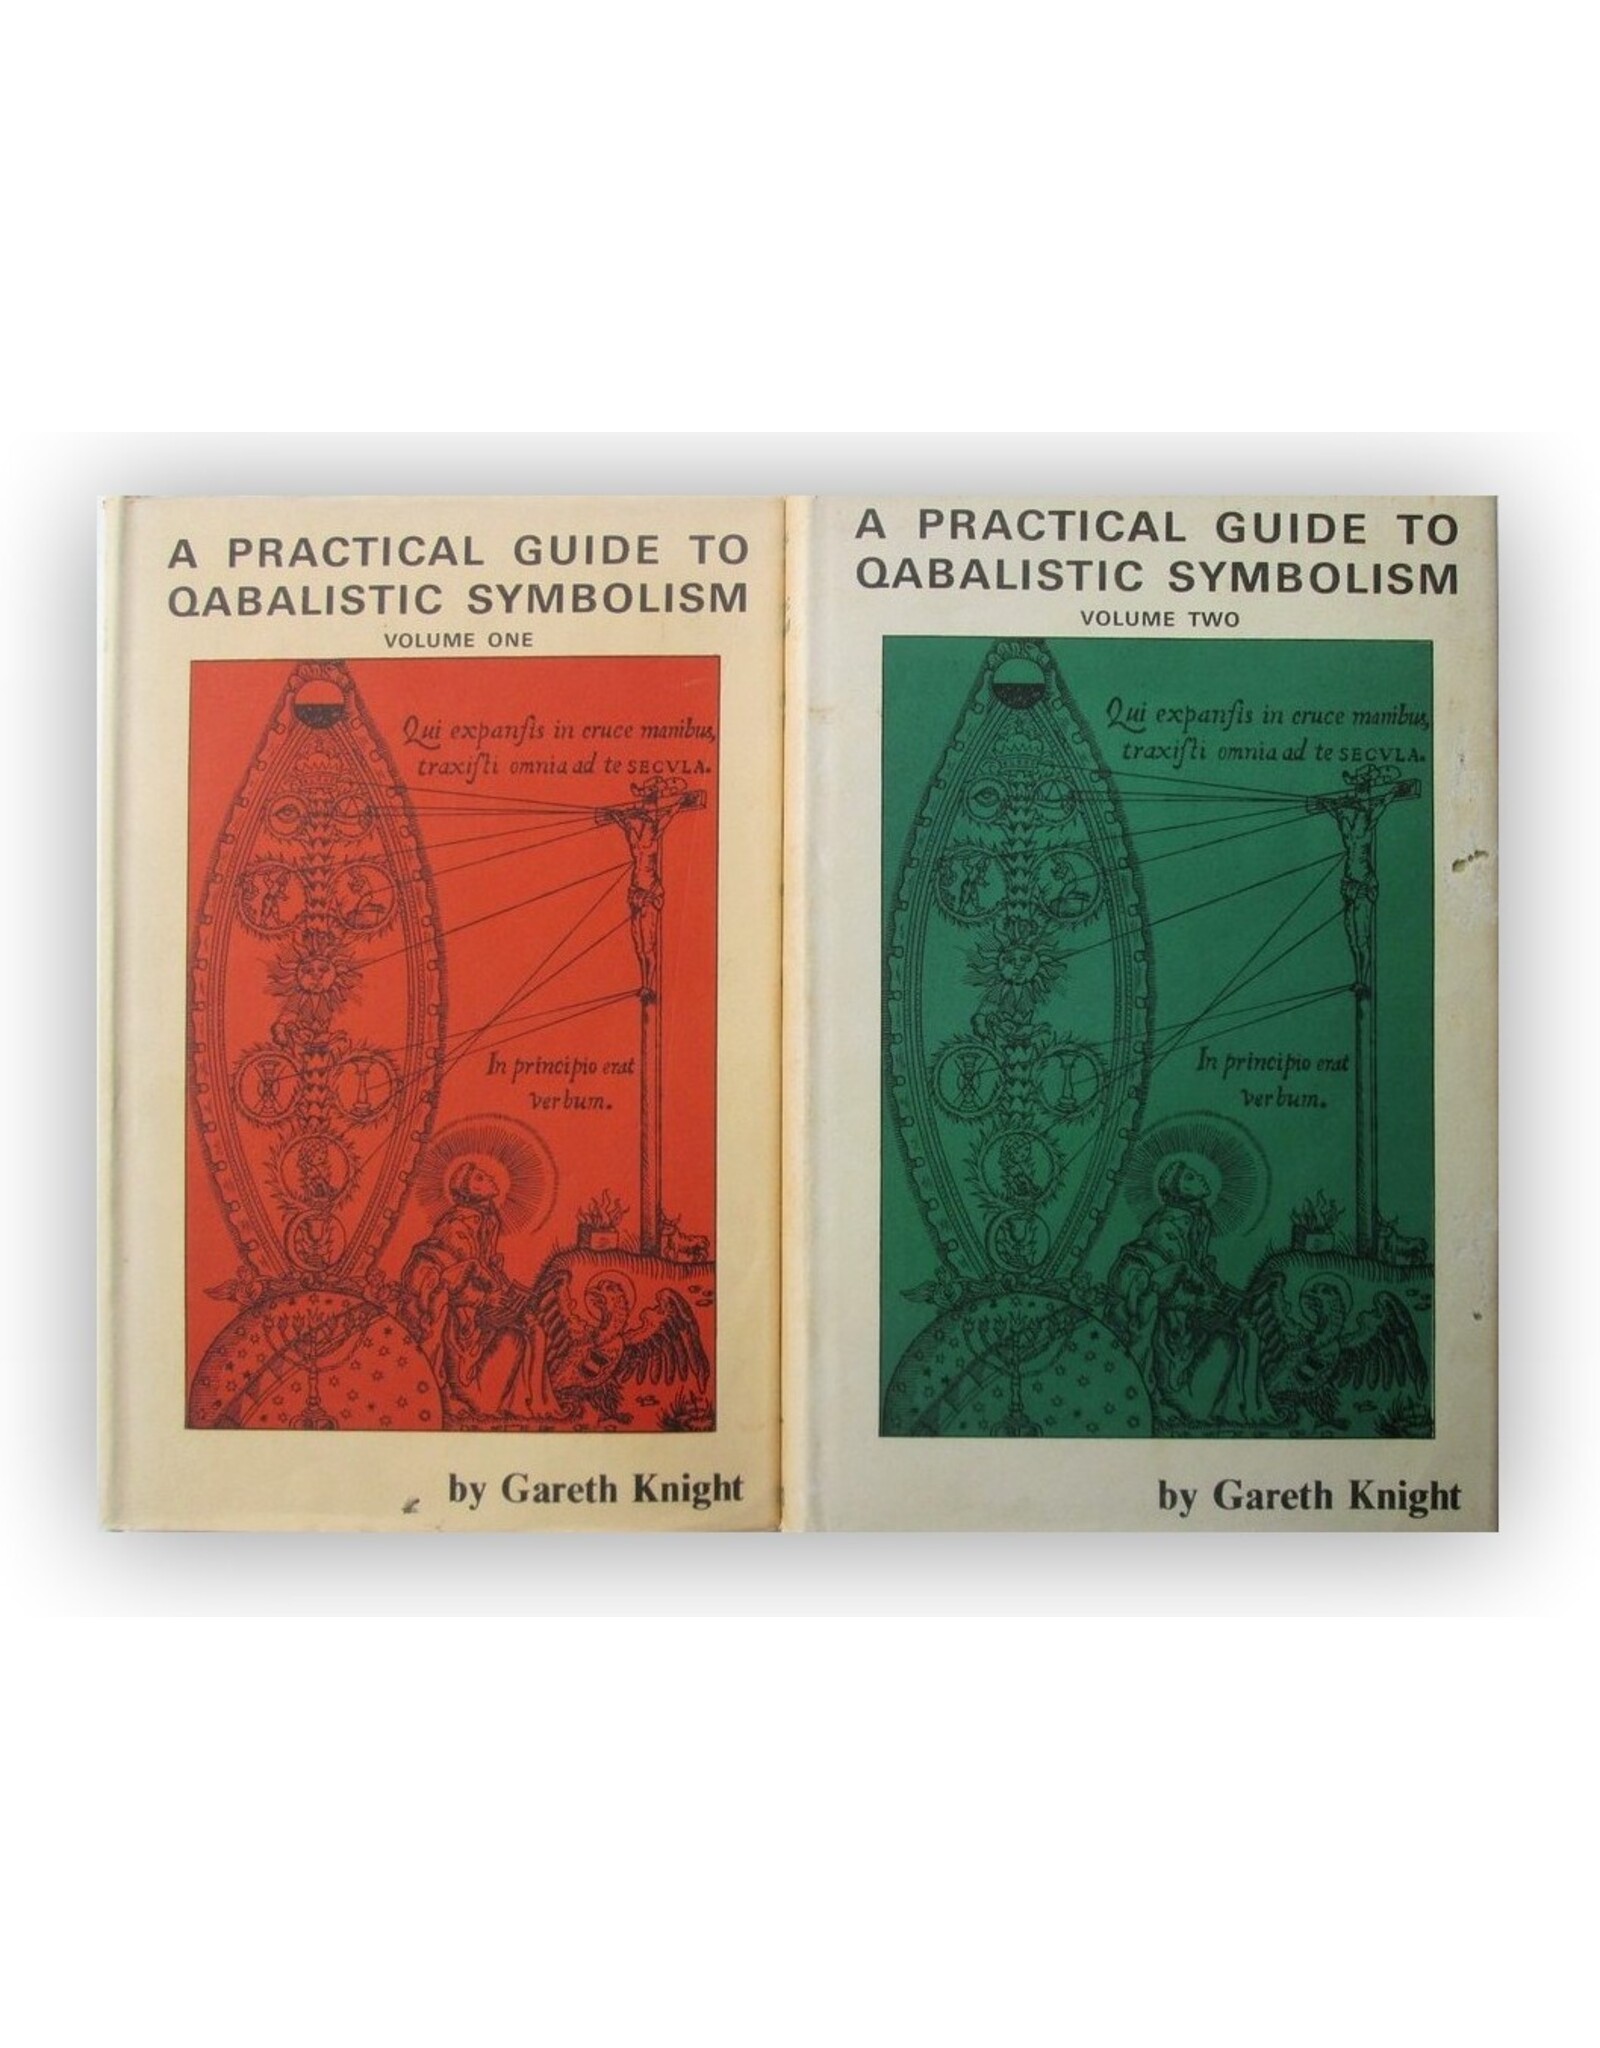 Gareth Knight - A Practical Guide to Qabalistic Symbolism. Vol. I. On the Spheres of the Tree of Life; Vol. II. On the Paths and the Tarot